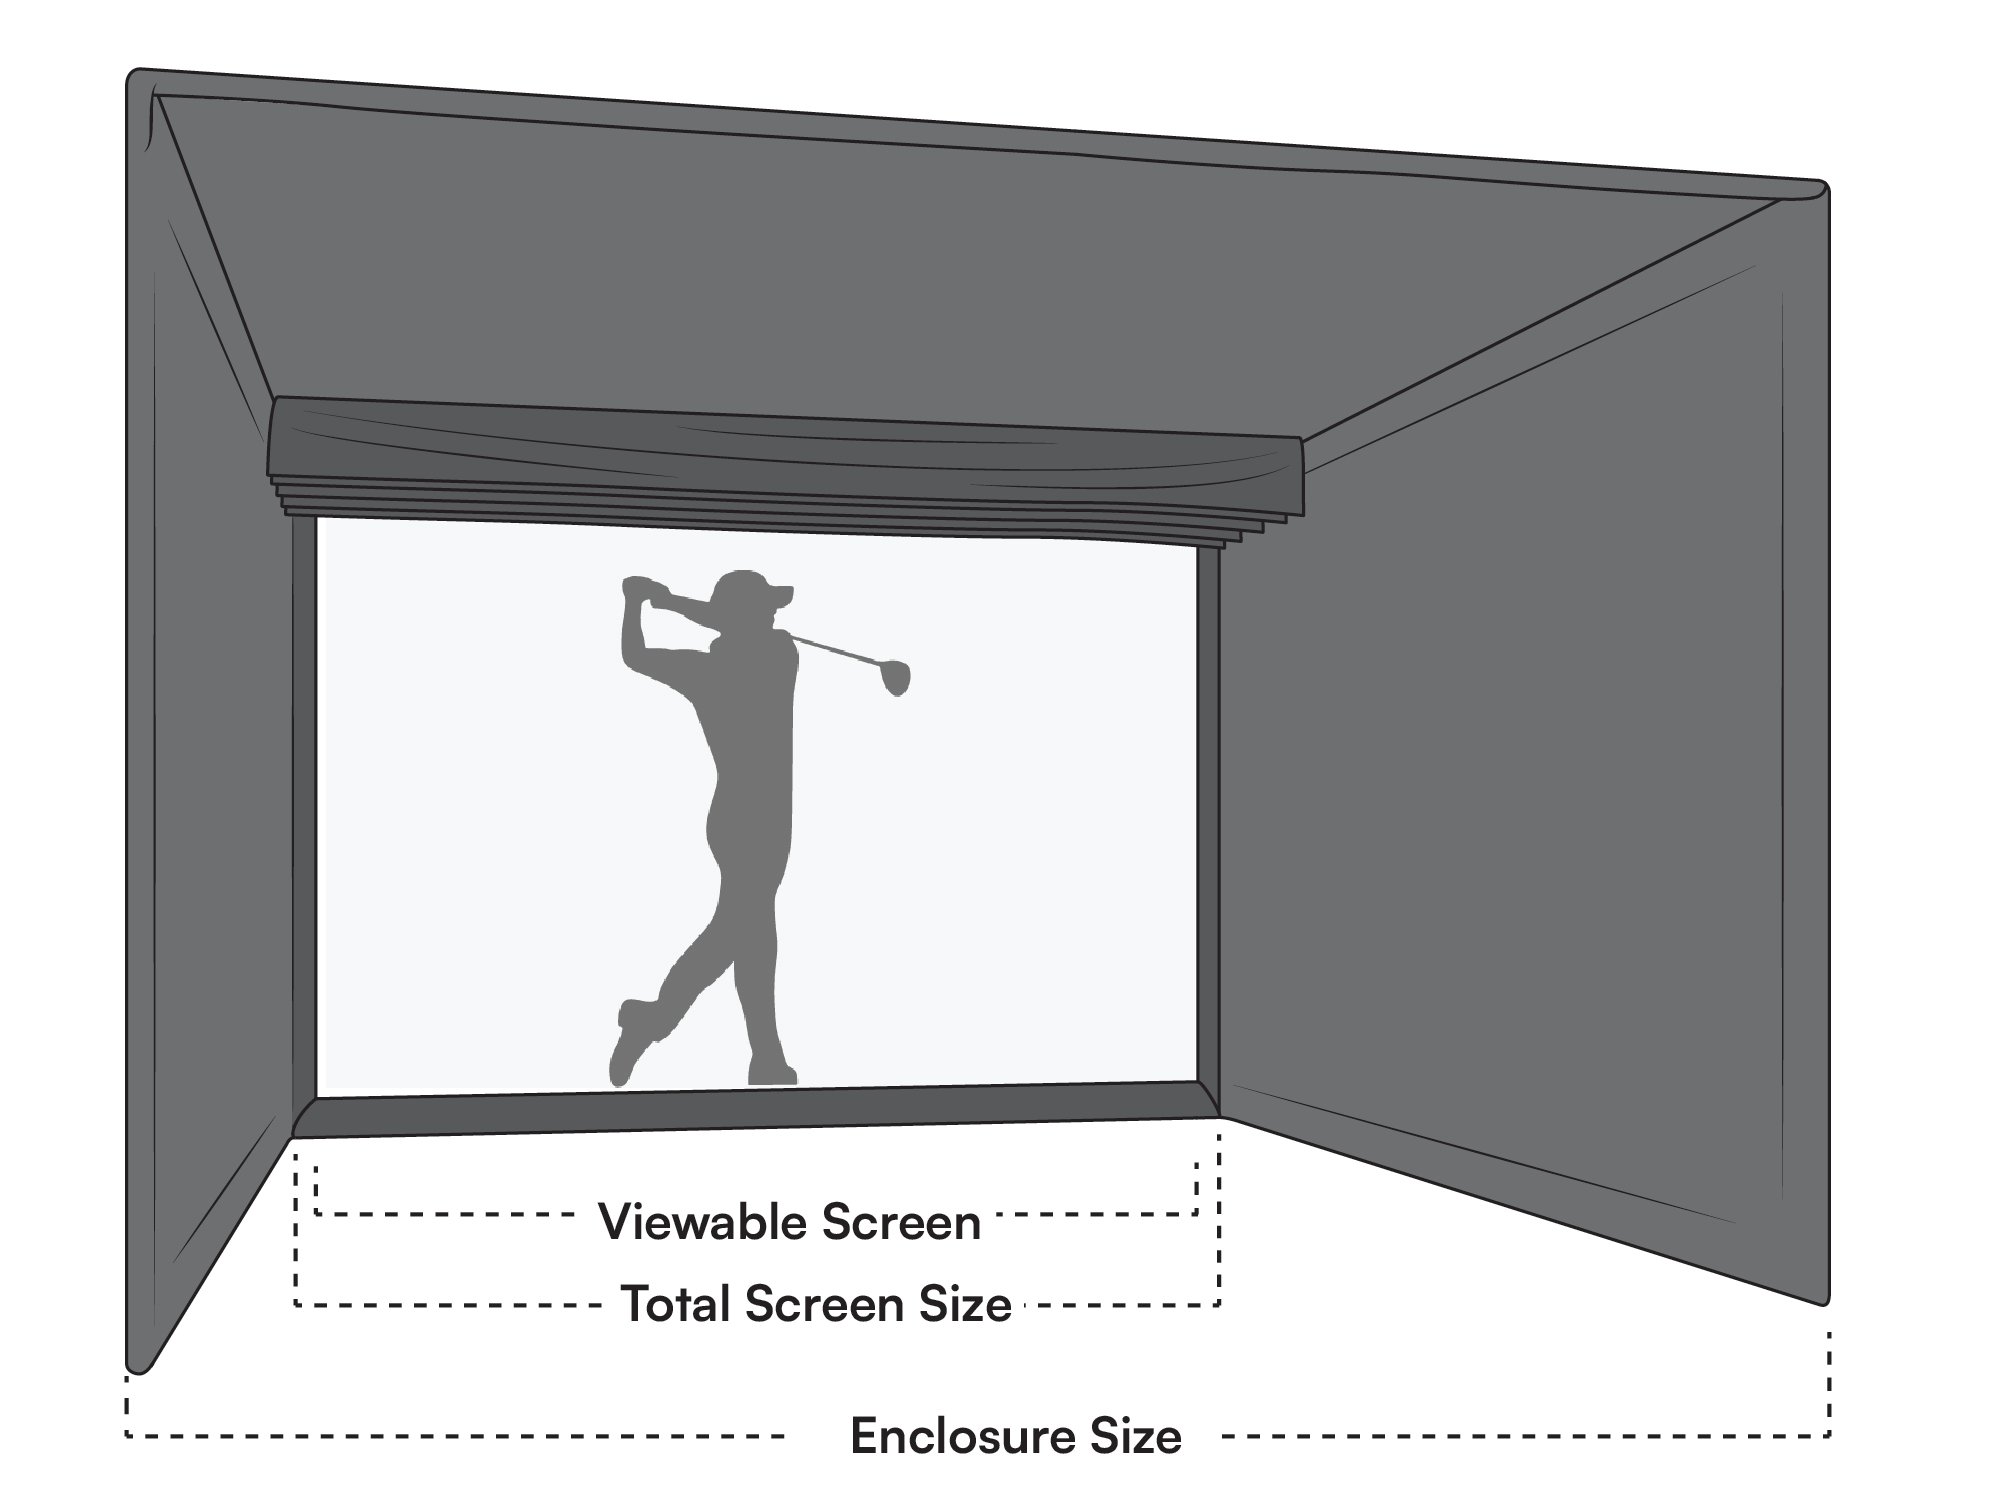 How To Choose the Best Golf Simulator Enclosure